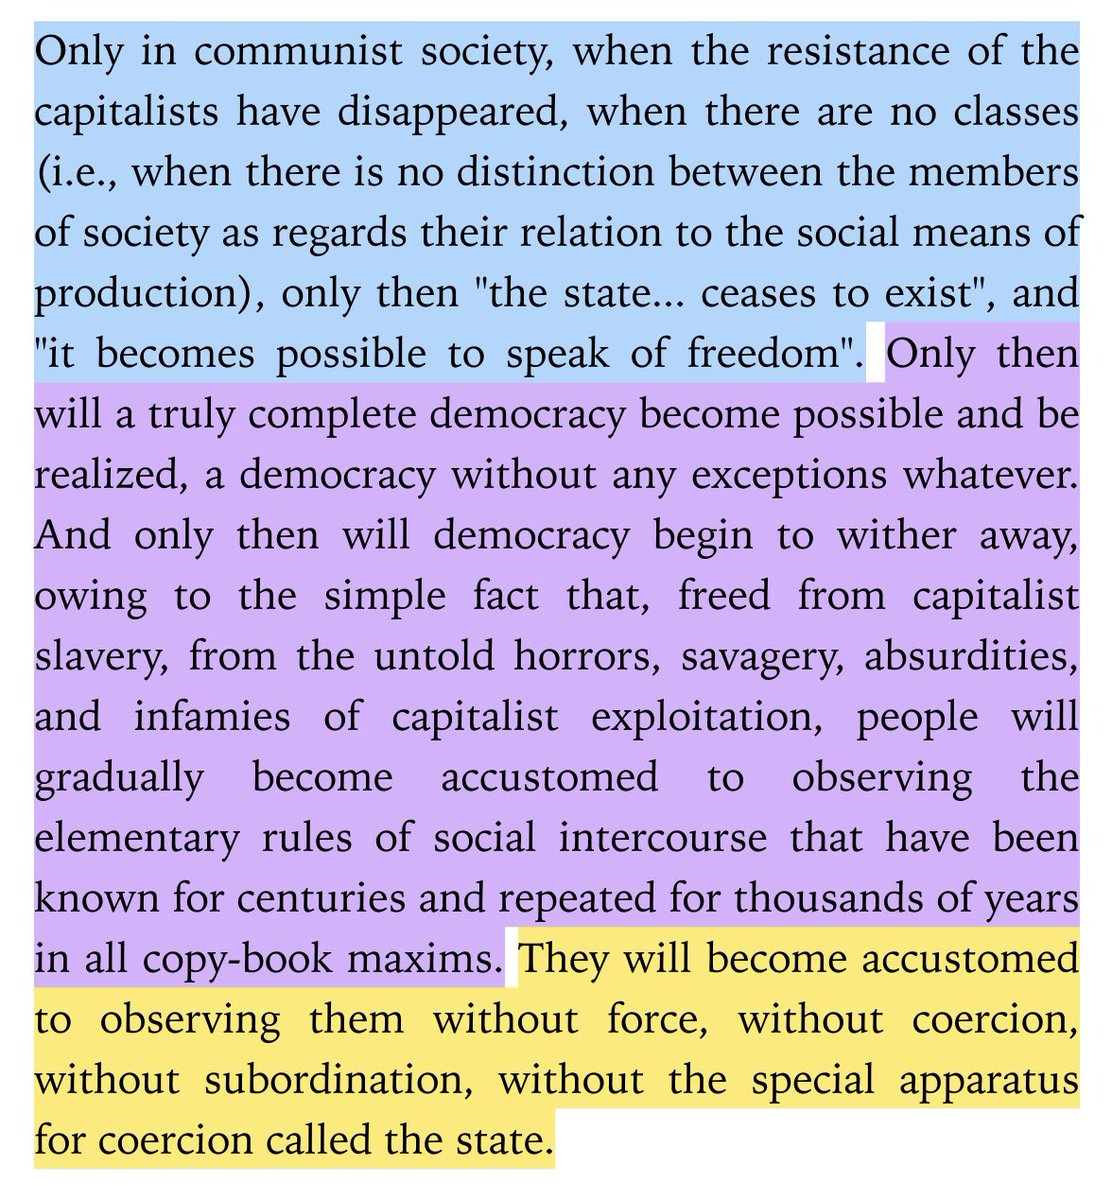 “only in communist society, when the resistance of the capitalists disappears, there are no classes (i.e., when there is no distinction b/w members of society as regards to the means of production), only then ‘the state ceases to exist’ & it becomes possible to speak of freedom.”